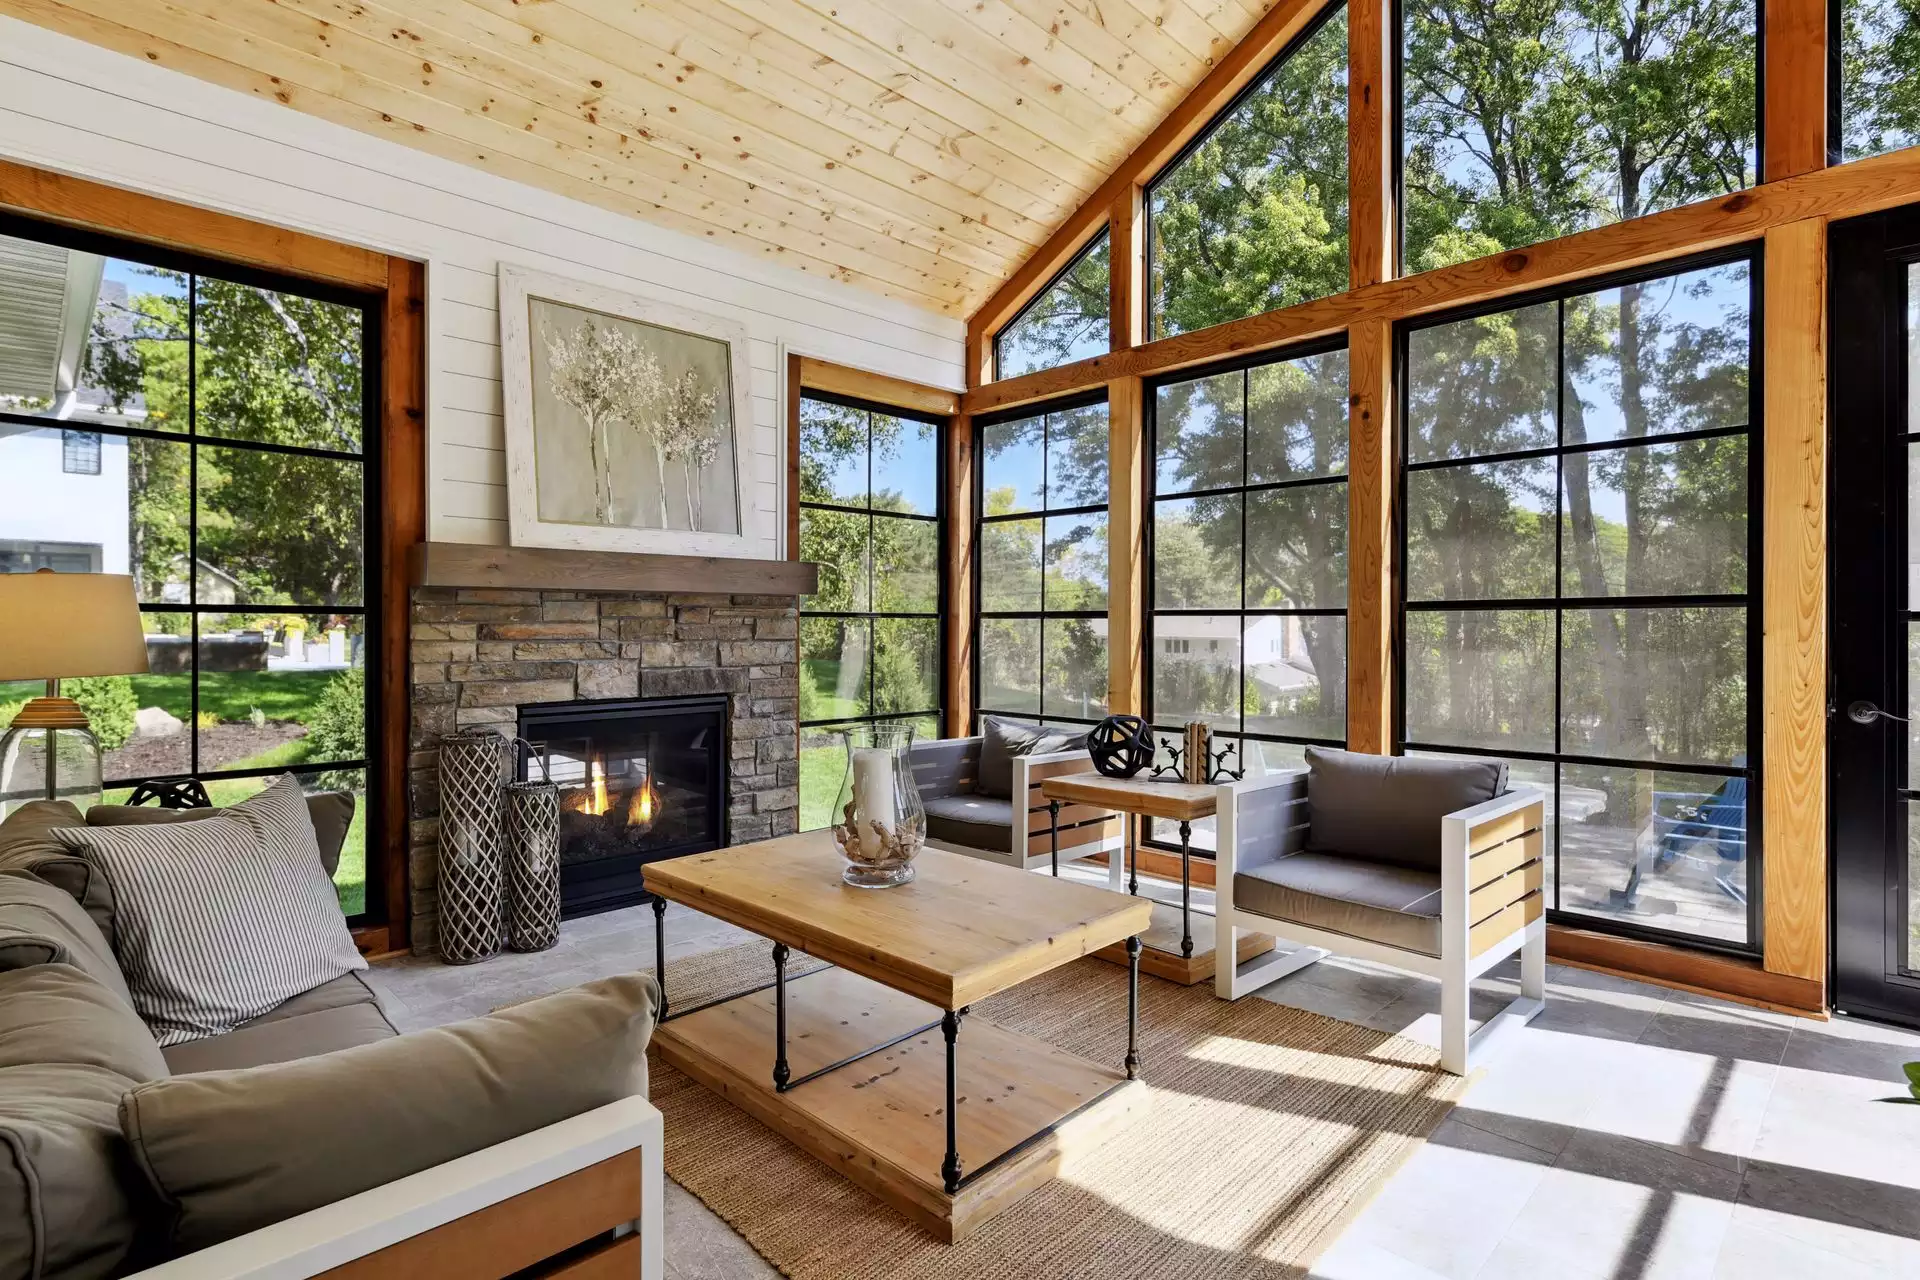 Multi-season porch to enjoy the views or your huge wooded back yard?